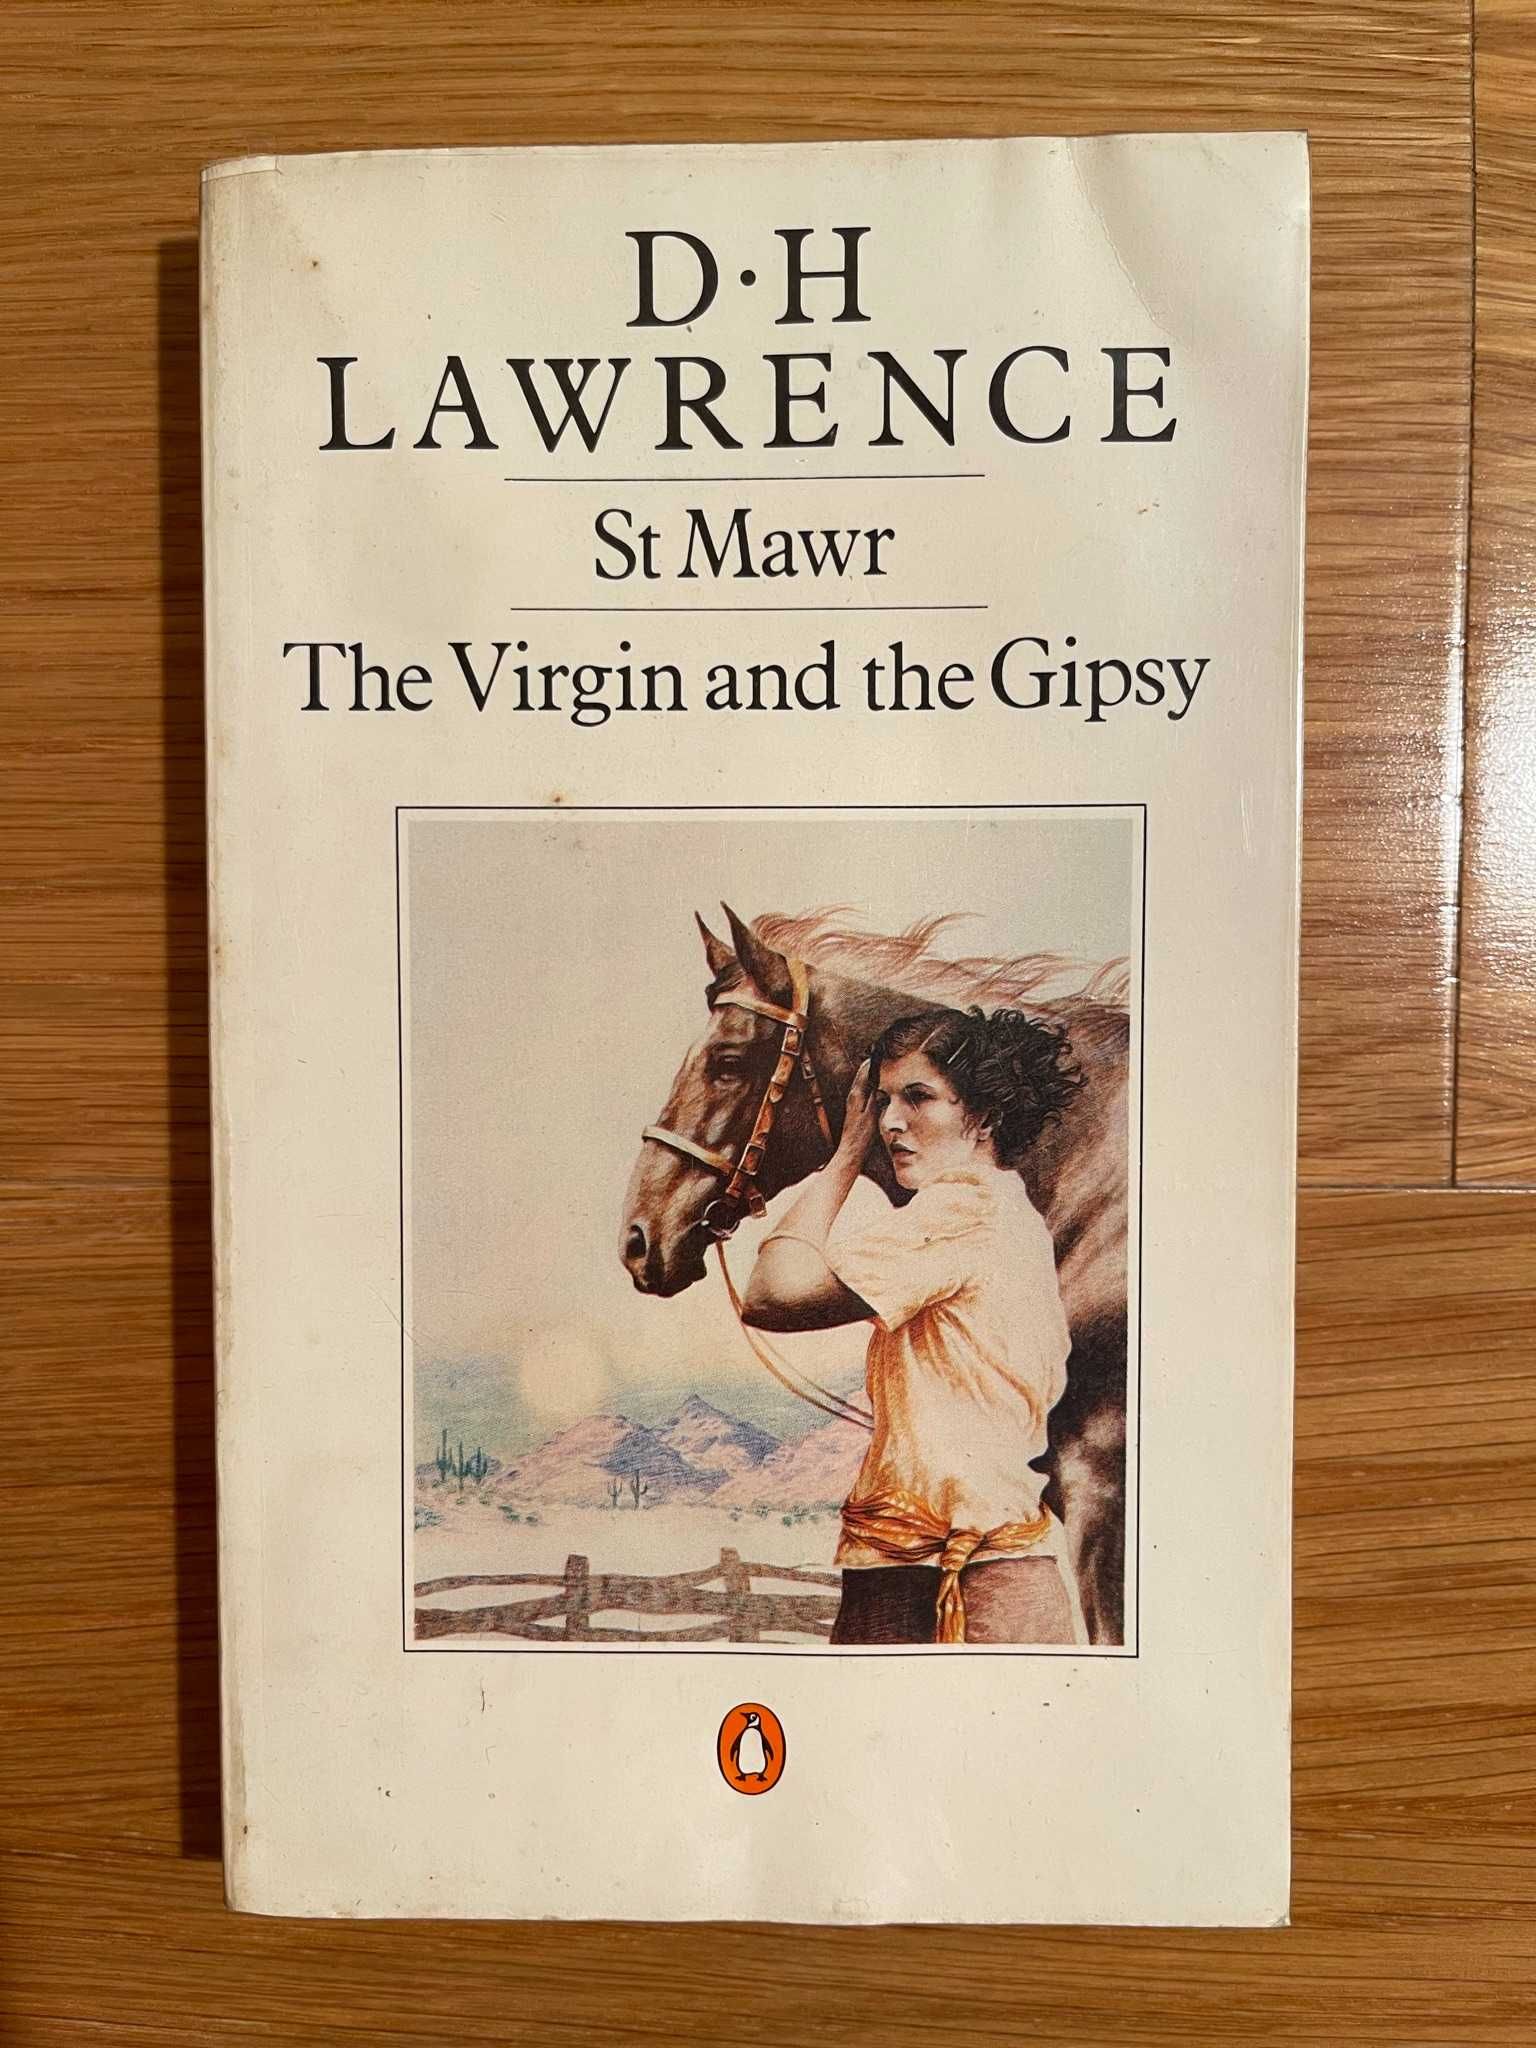 "The Virgin and the Gipsy", de D.H. Lawrence